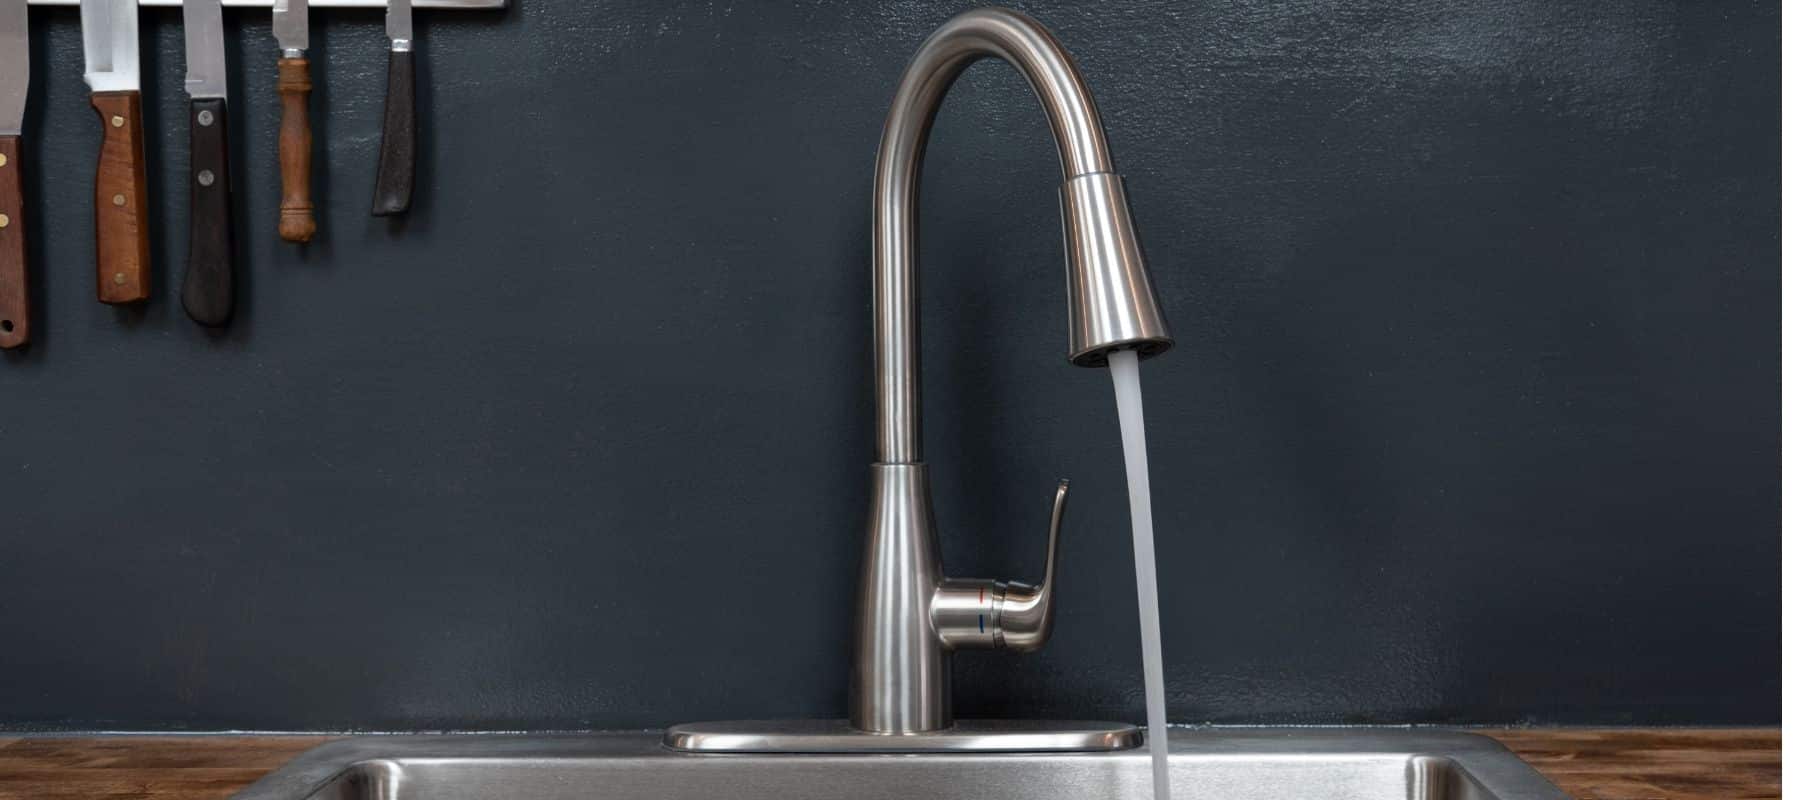 closeup of a kitchen sink with water running out of it and knives hanging on a magnetic strip